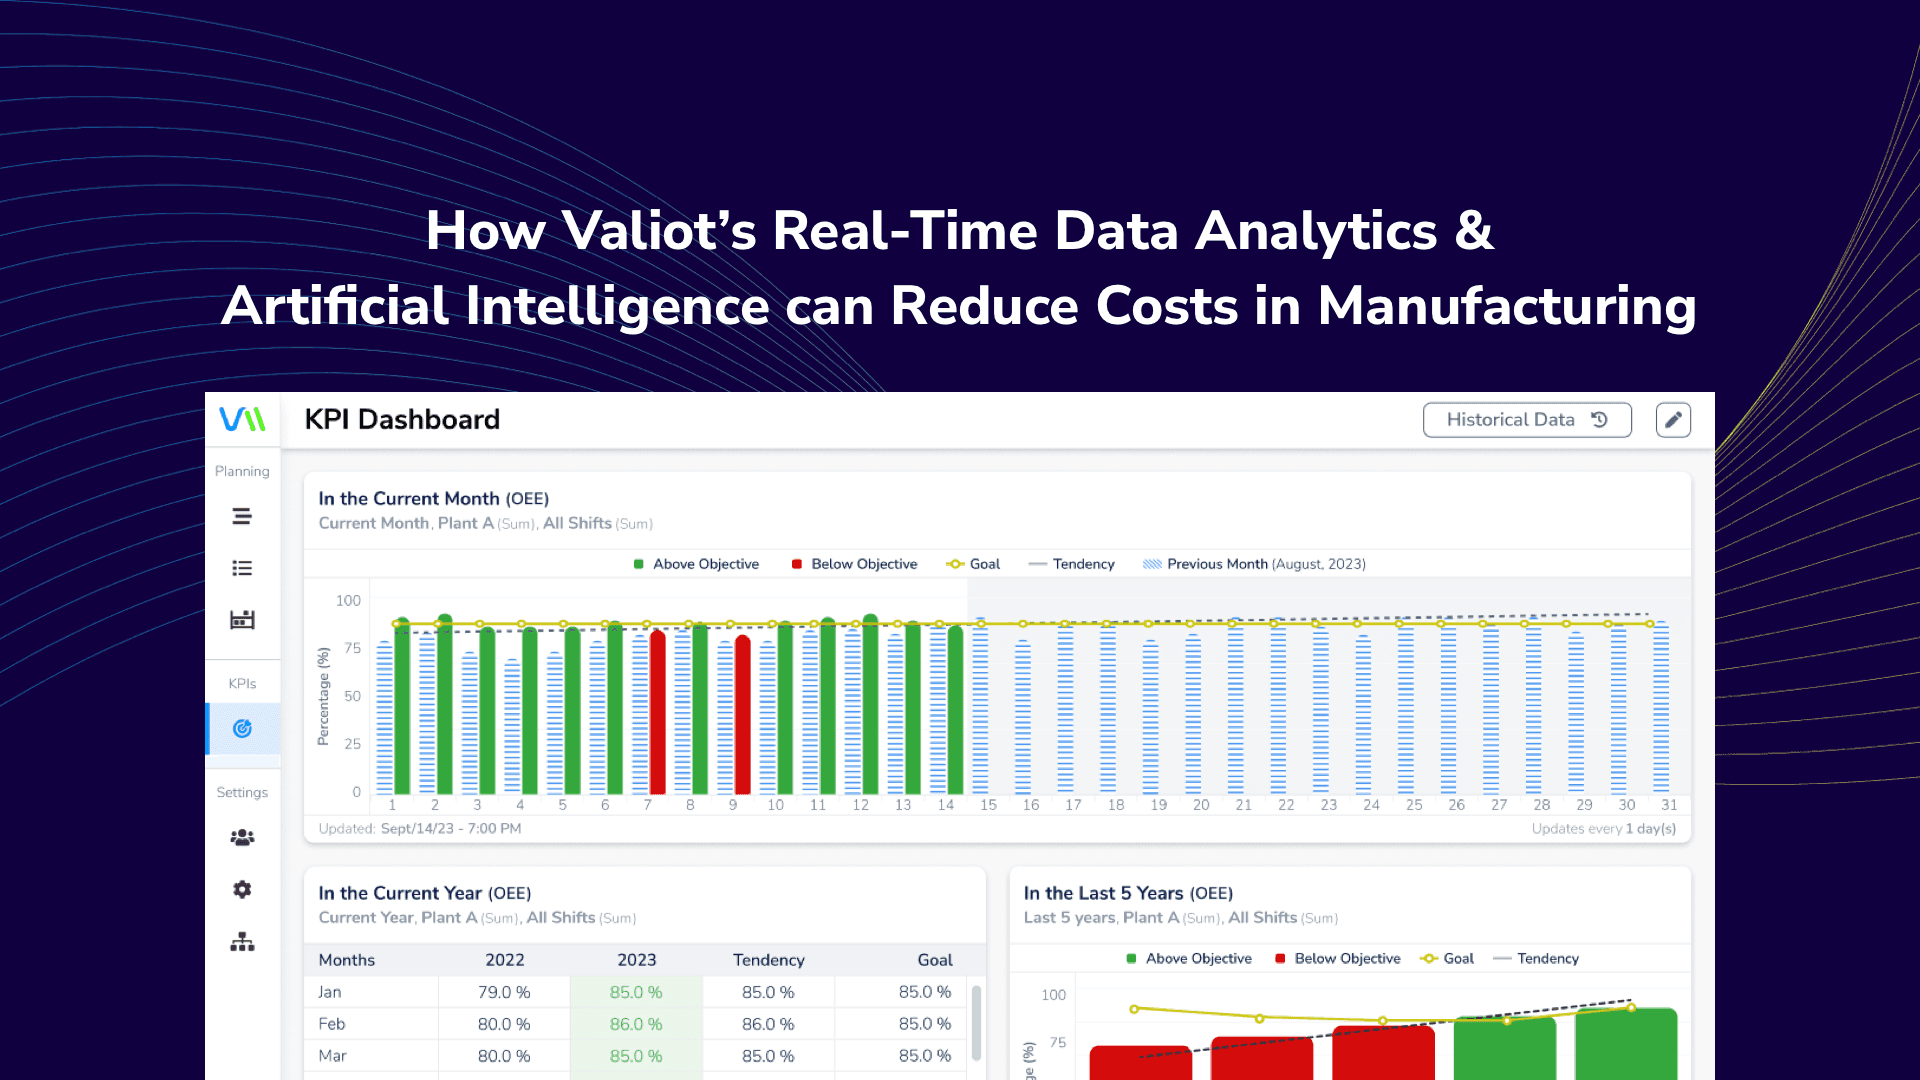 How Valiot’s real-time Data Analytics & Artificial Intelligence can reduce costs in manufacturing